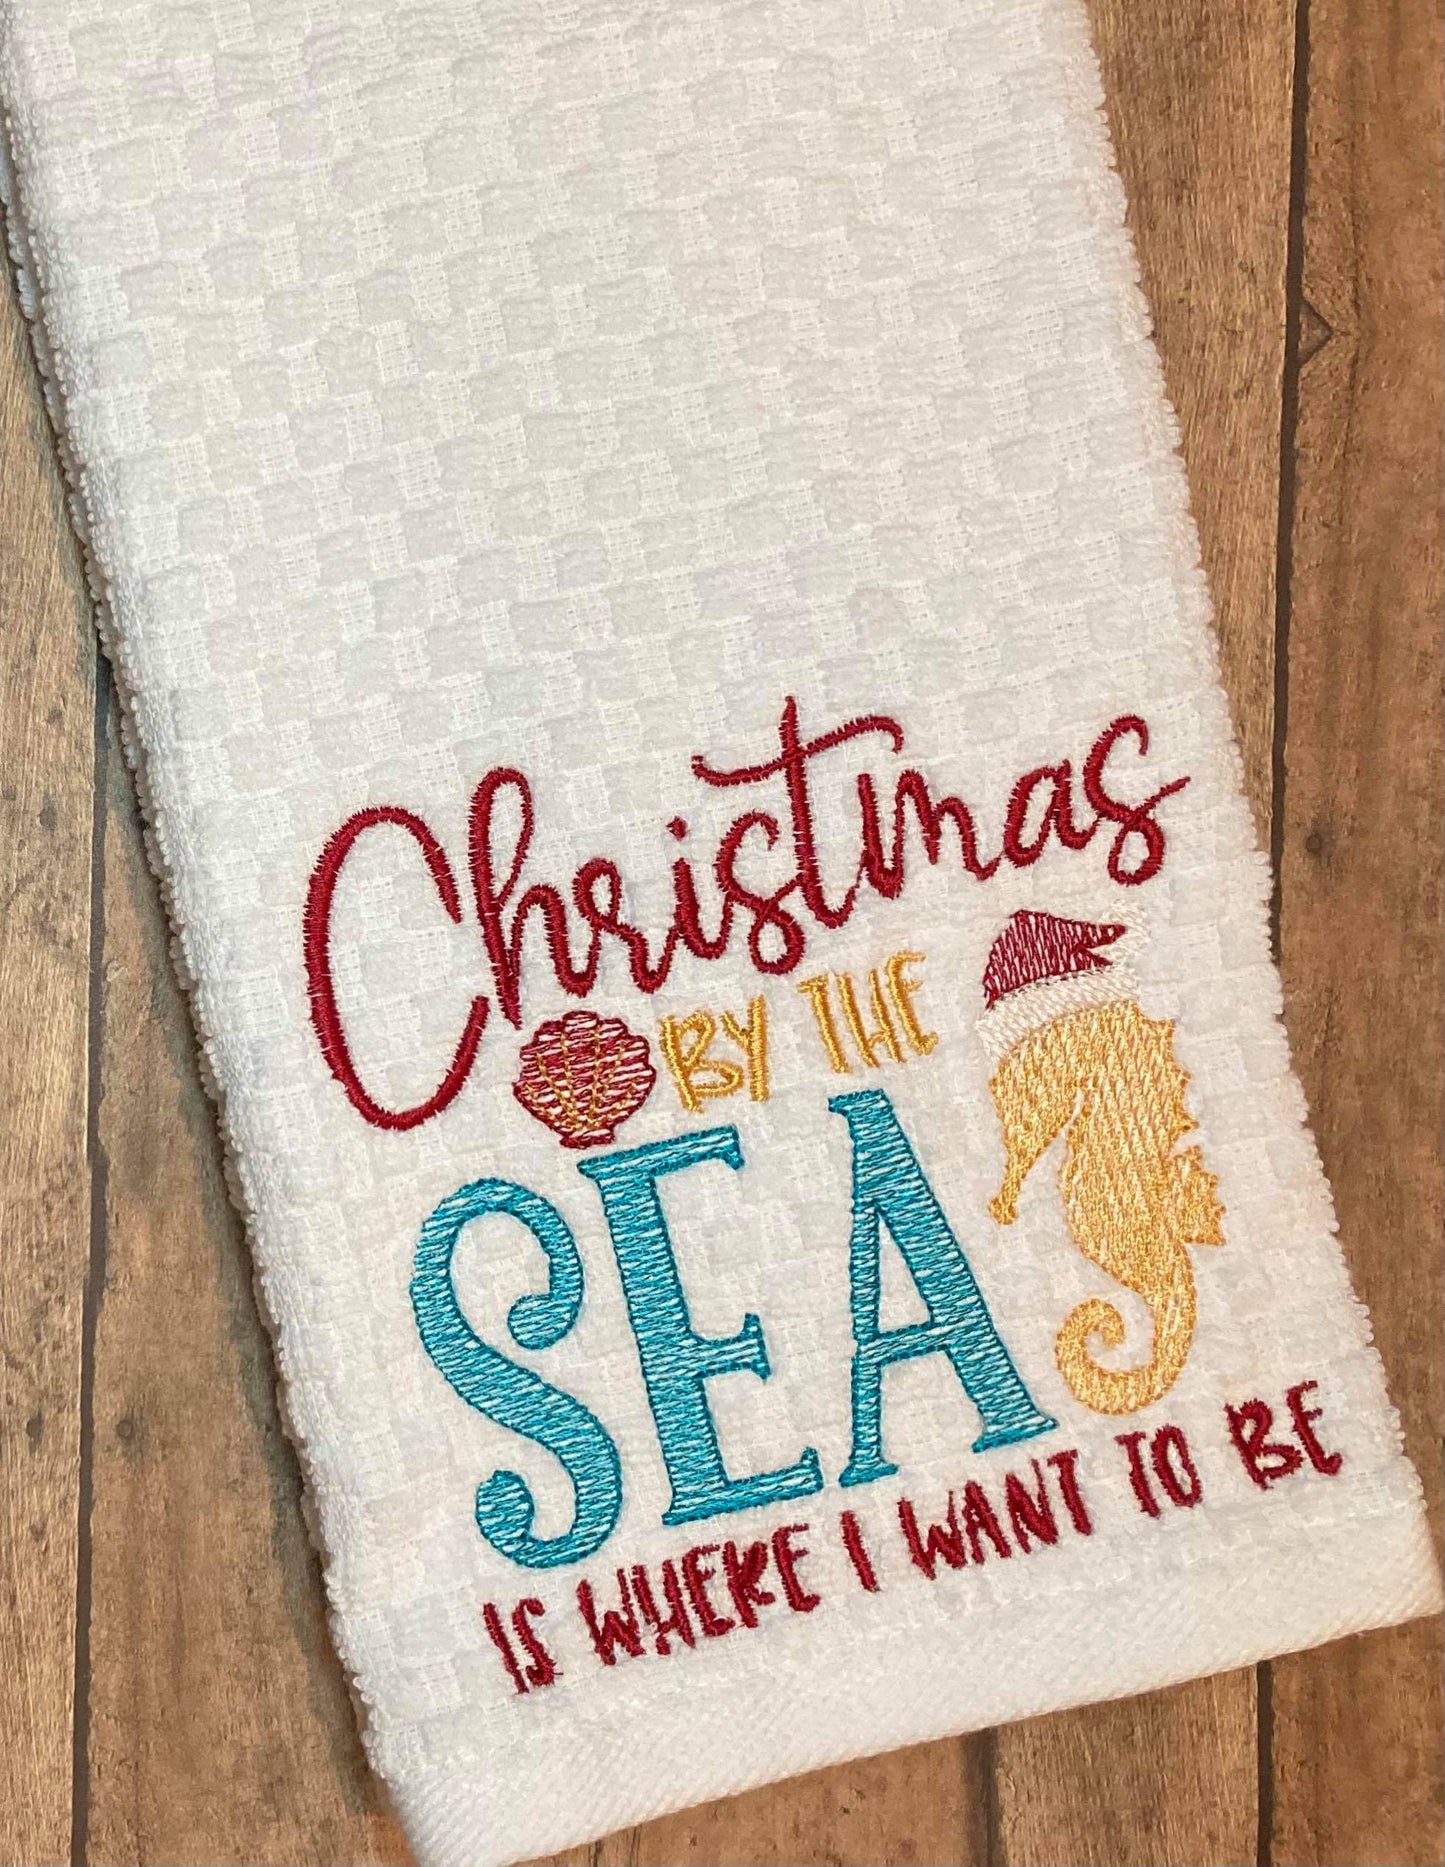 Christmas By The Sea - 3 sizes- Digital Embroidery Design